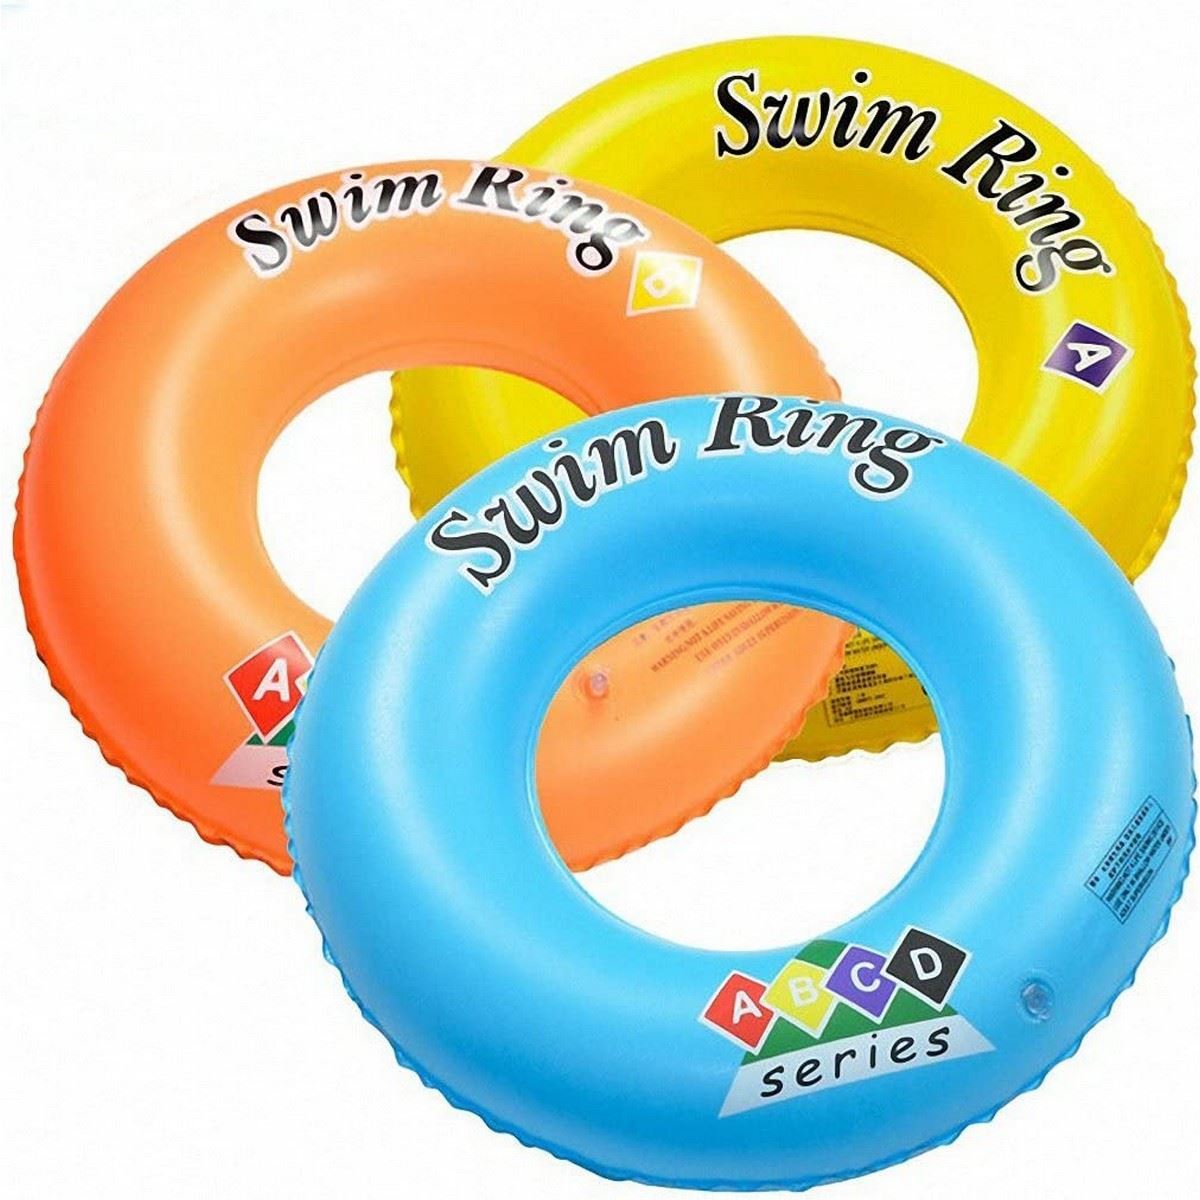 50cm inflatable ring ABCD